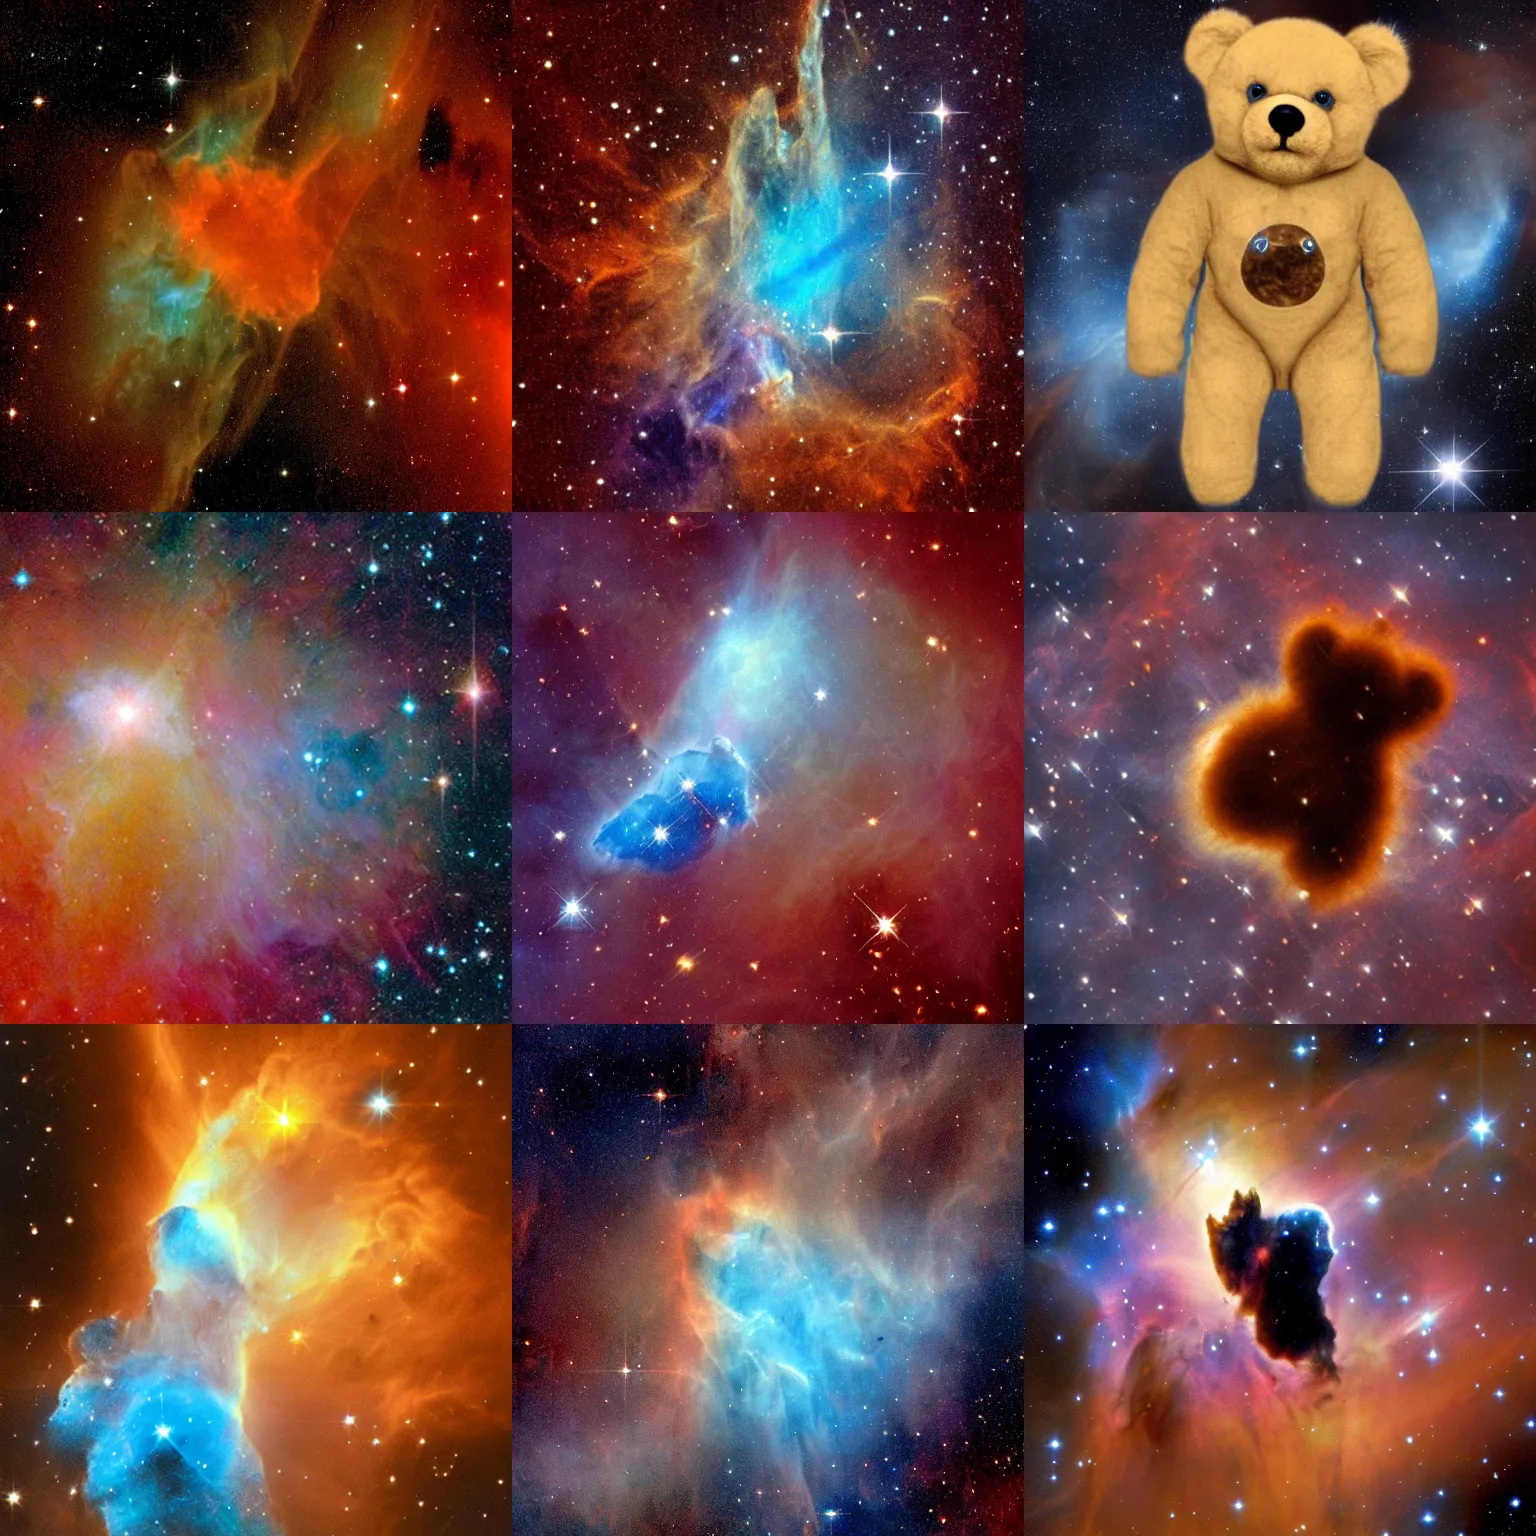 Prompt: hubble space telescope image of a nebula in the shape of a teddy bear